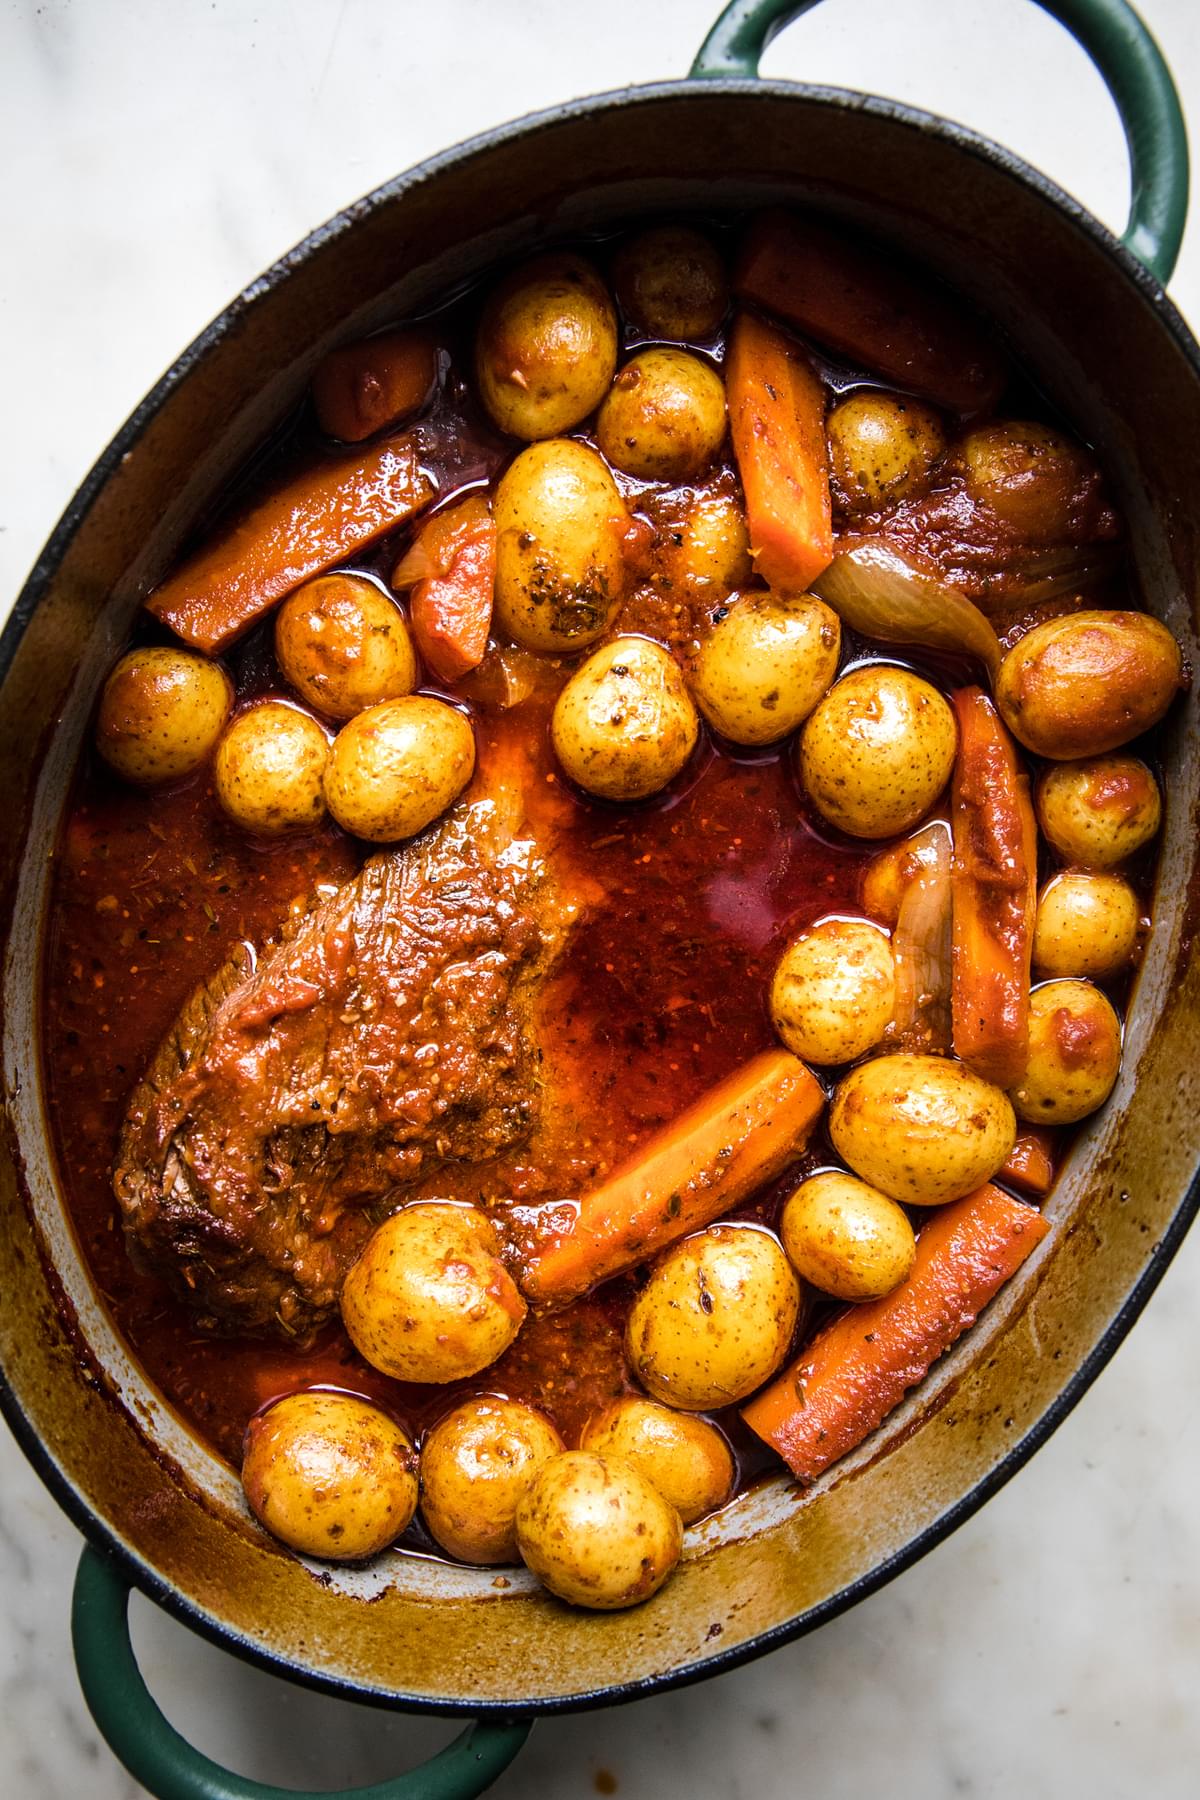 braised brisket with potatoes, carrots and onions in a dutch oven